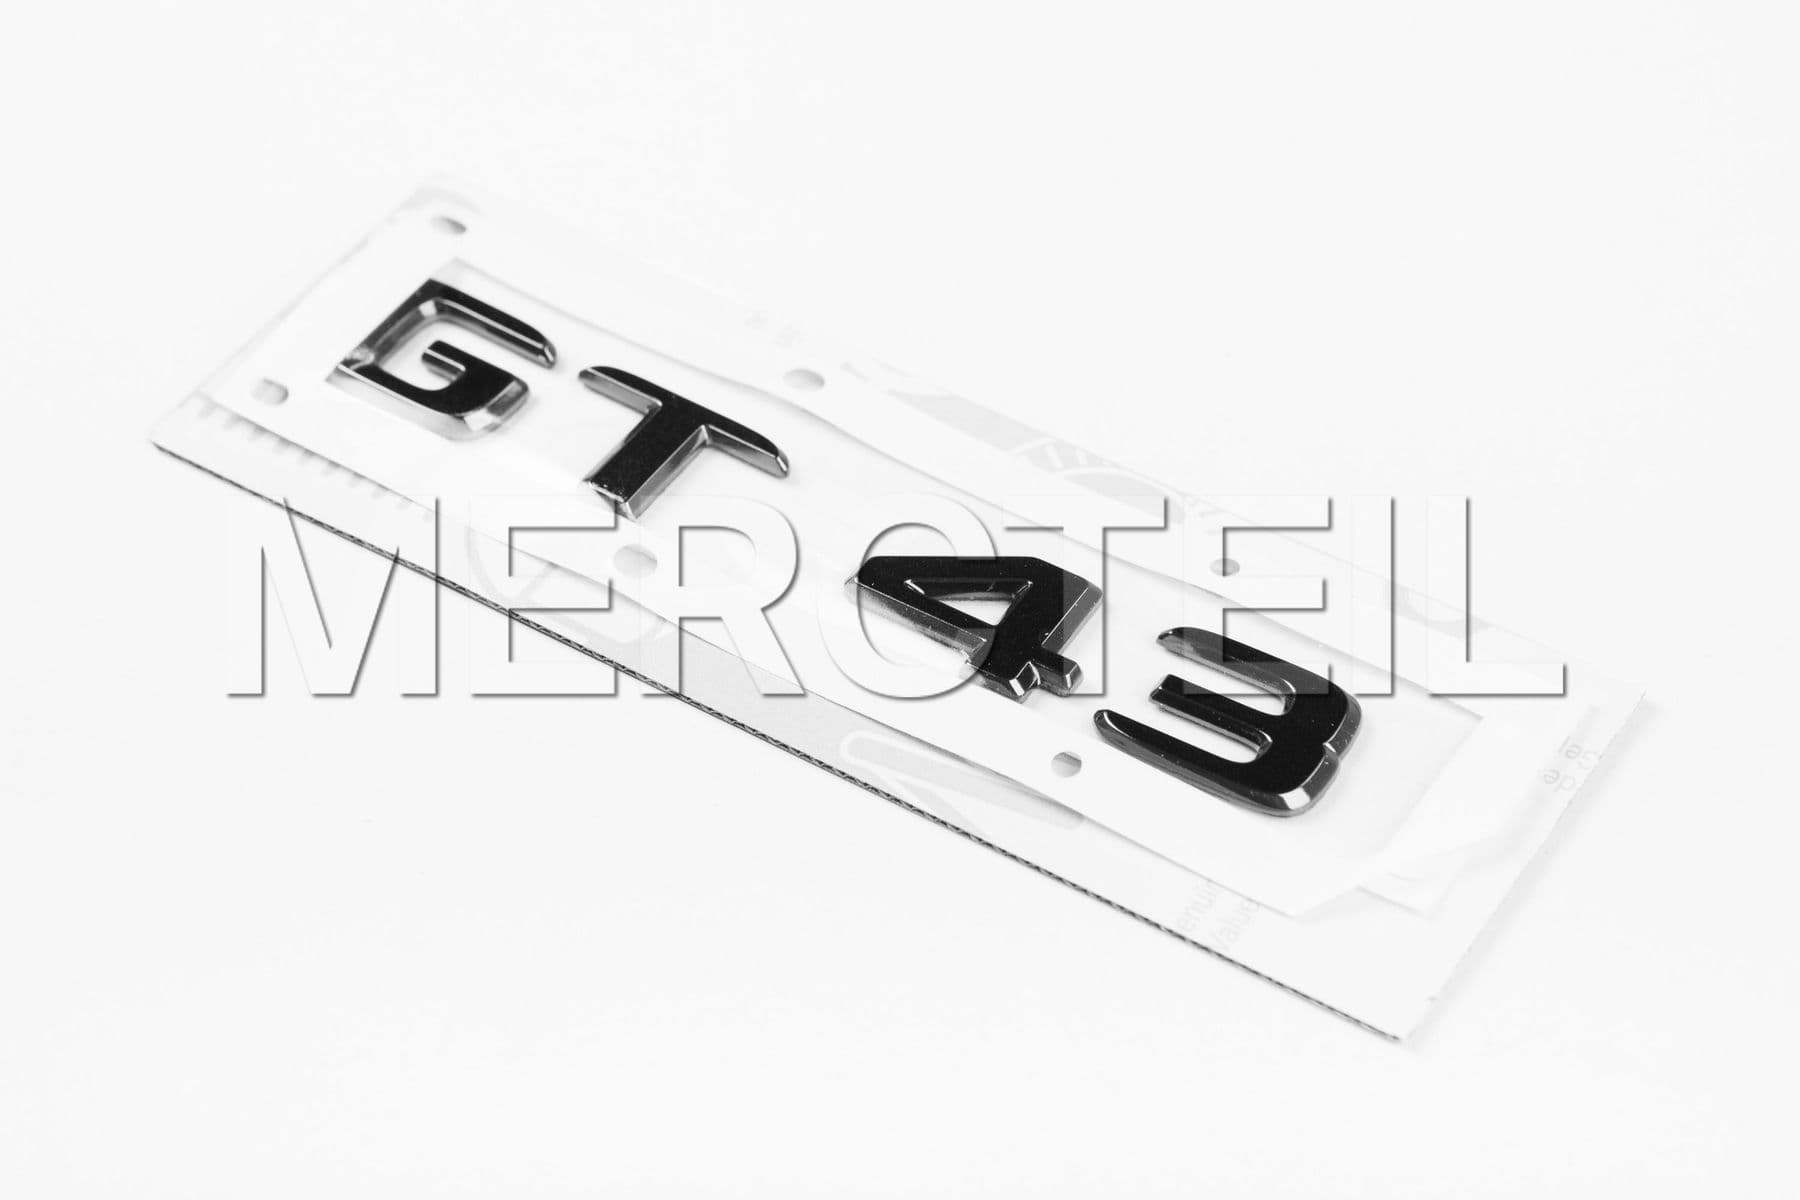 CLA W117 180 200 250 45 AMG Emblem Rear Mercedes Logo Badge - Rexsupersport  - Specializes In Providing Carbon Fibre Parts and Accessories